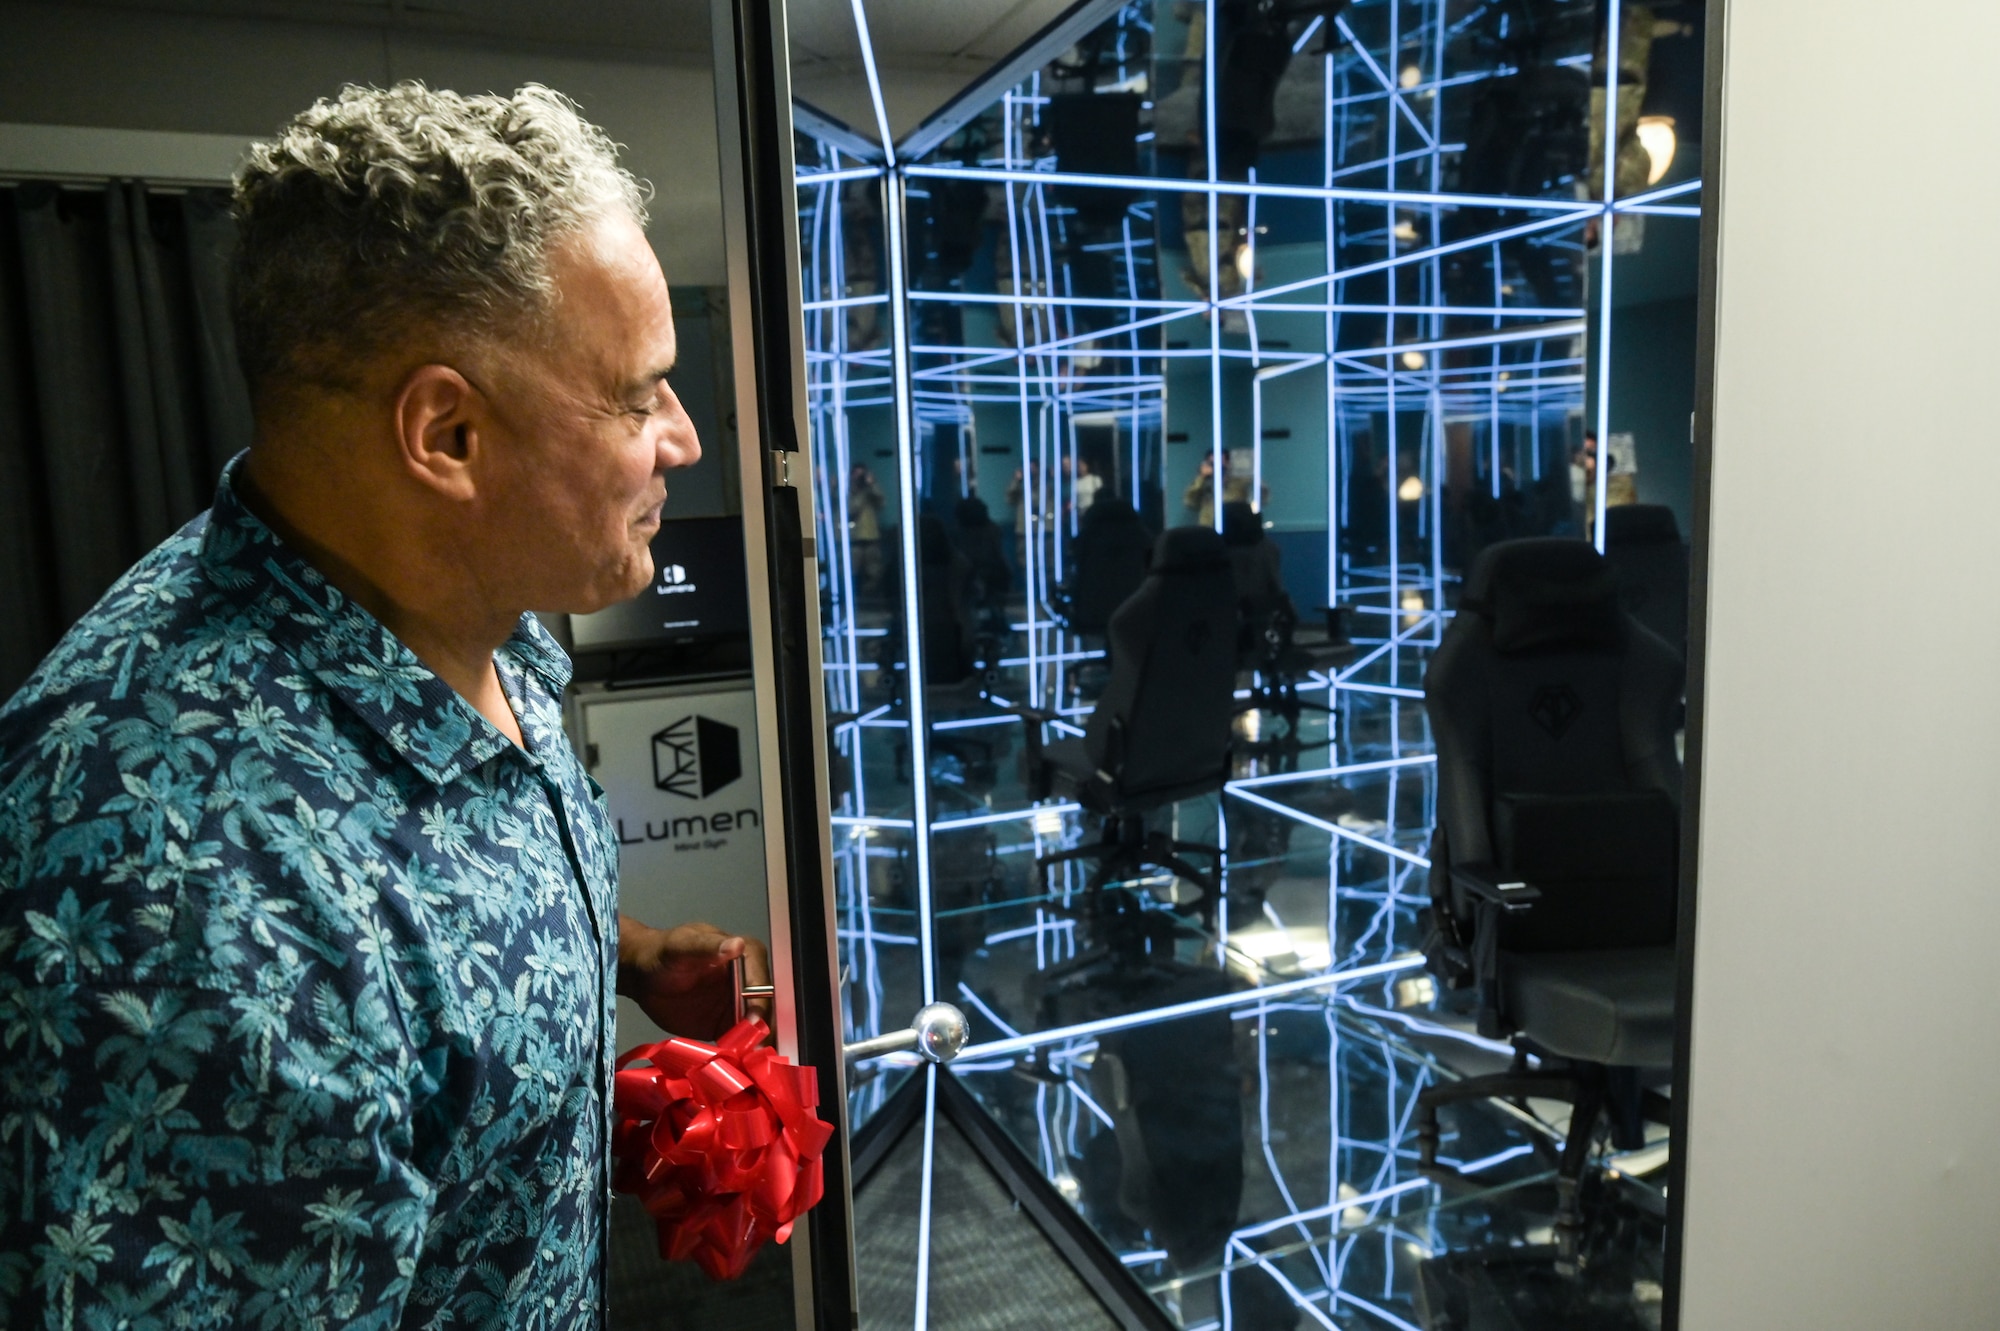 Dr. John Duarte, 15th Wing prevention team coordinator, opens the door of a Lumena MindGym in Hangar 2 at Joint Base Pearl Harbor-Hickam, Hawaii, May 12, 2023. The MindGym creates a sensory deprivation, bio-responsive mindfulness environment, providing Team Hickam with an additional tool to build resiliency and improve mental health. (U.S. Air Force photo by Staff Sgt. Alan Ricker)